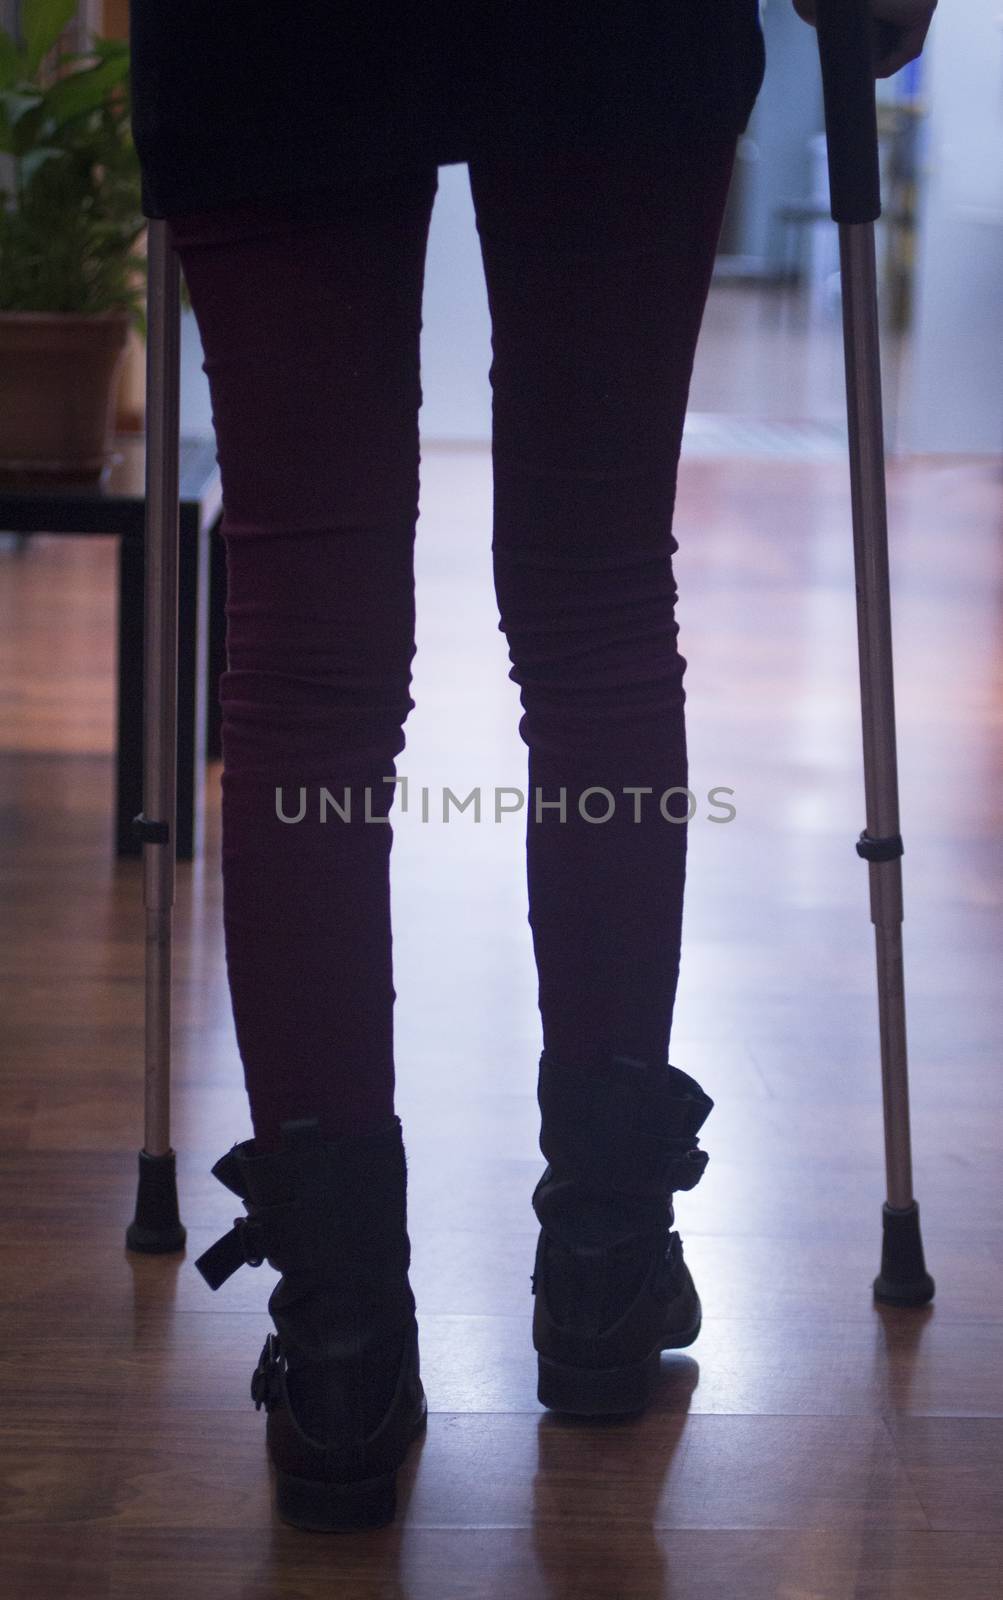 Young woman in black jeans and boots walking on aluminium metal crutches in hospital clinic in artistic silhouette color photo.